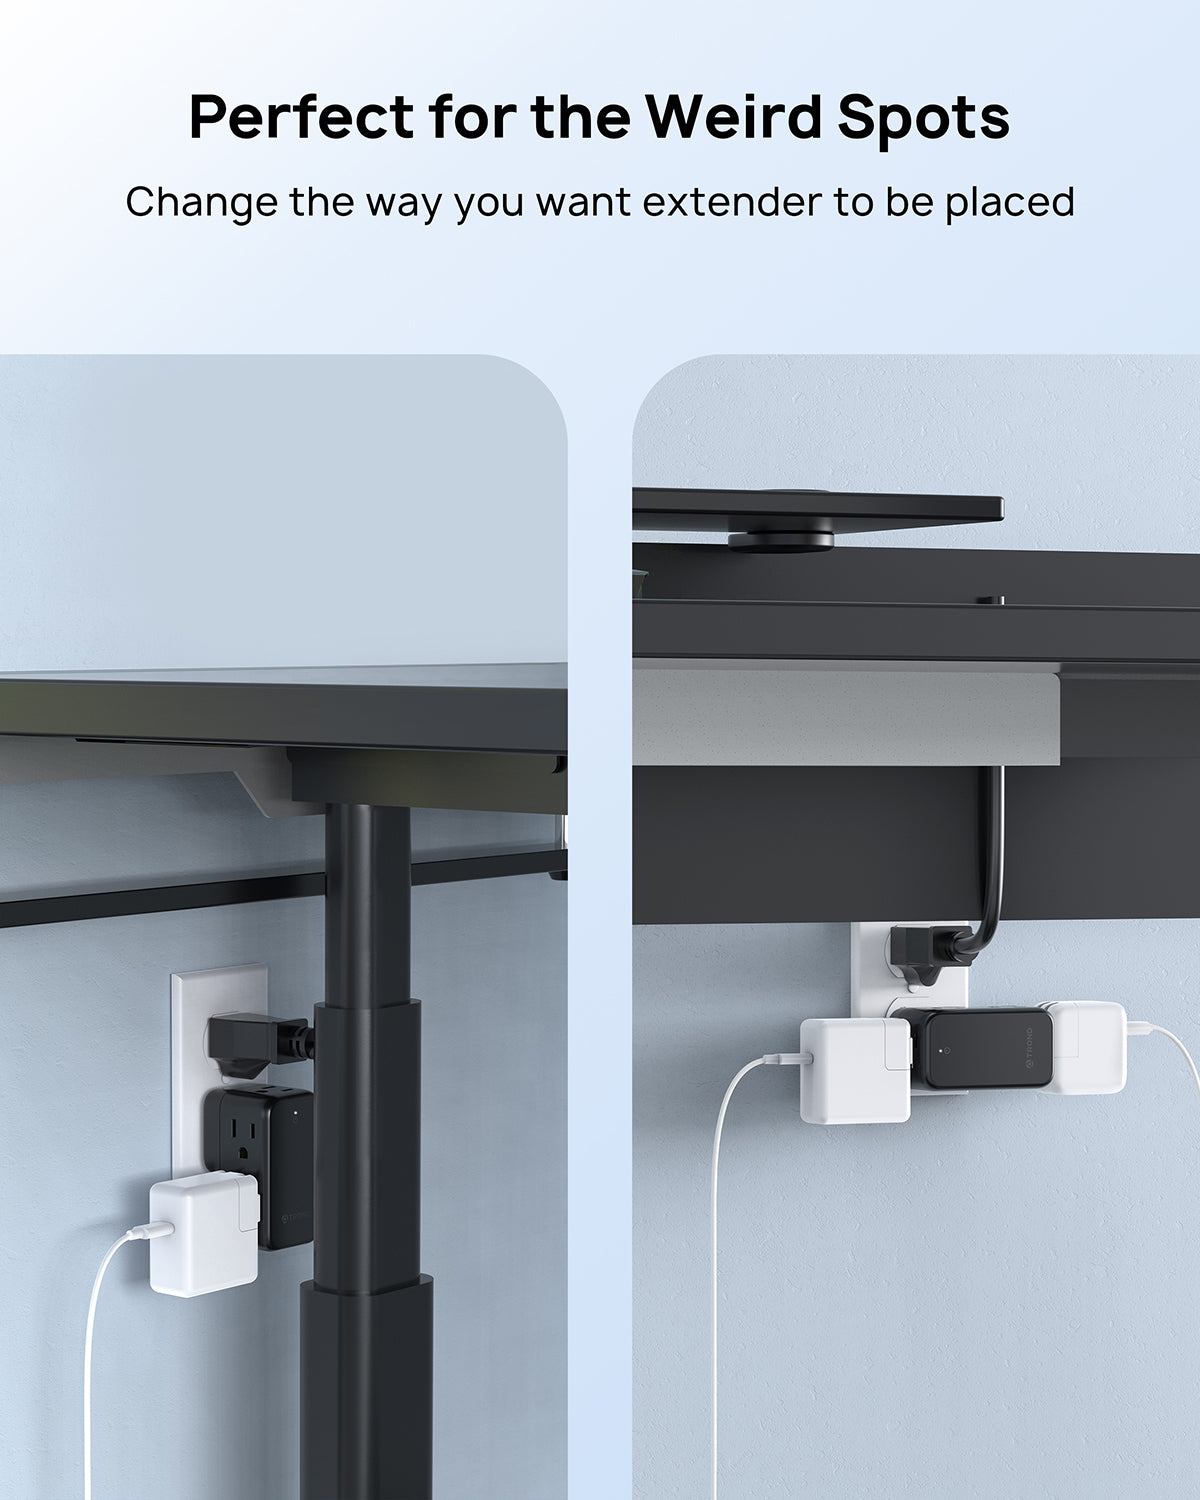 Outlet Extender with Rotating Plug, 6 AC Outlet Splitter